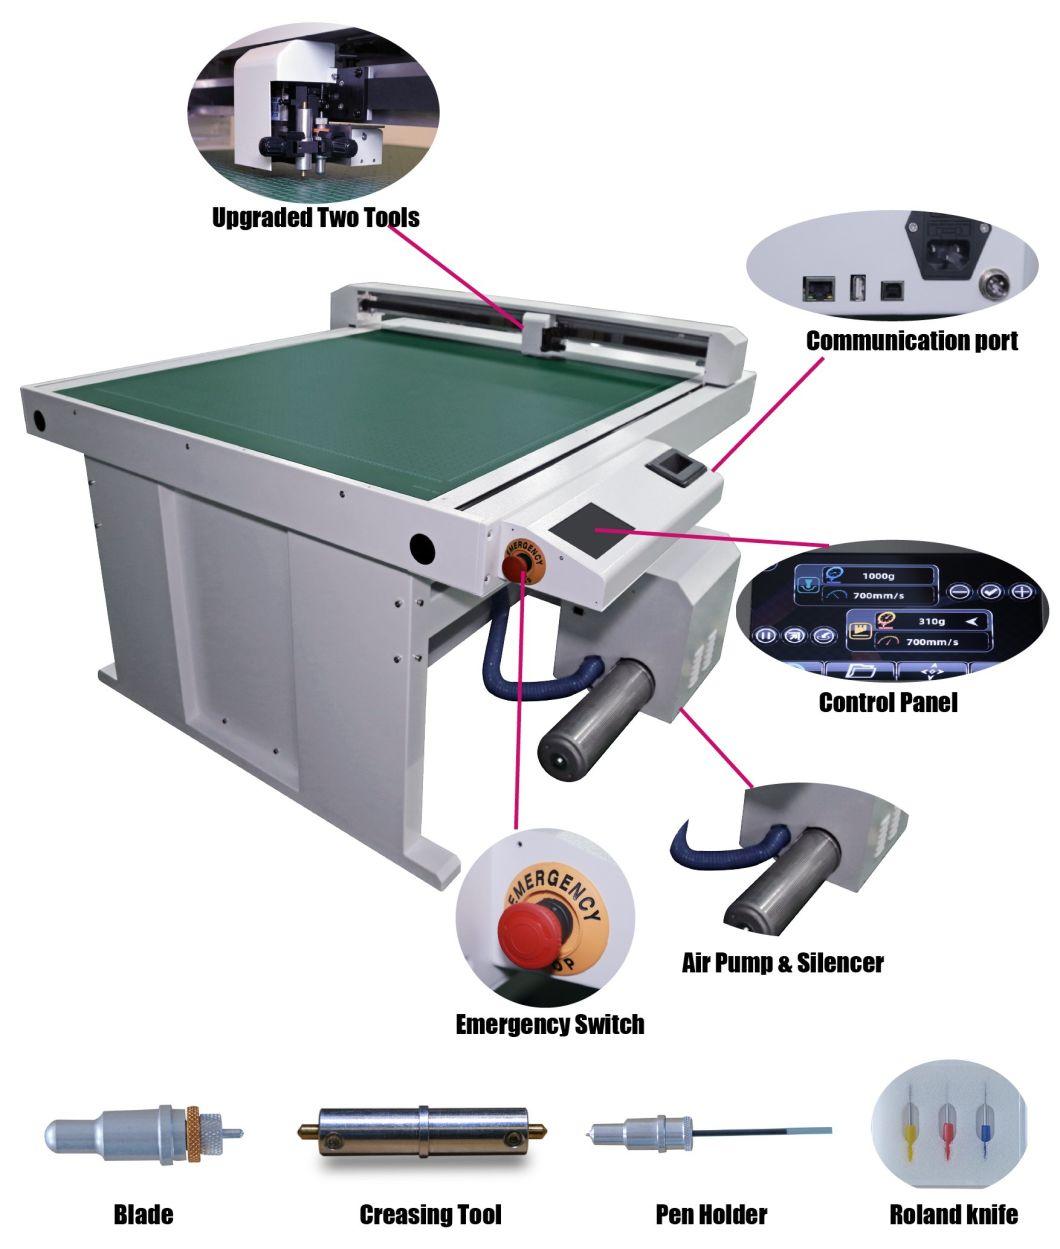 Intelligent Control Panel Double Tool Holds Cutting and Creasing Machine Flatbed Cutter